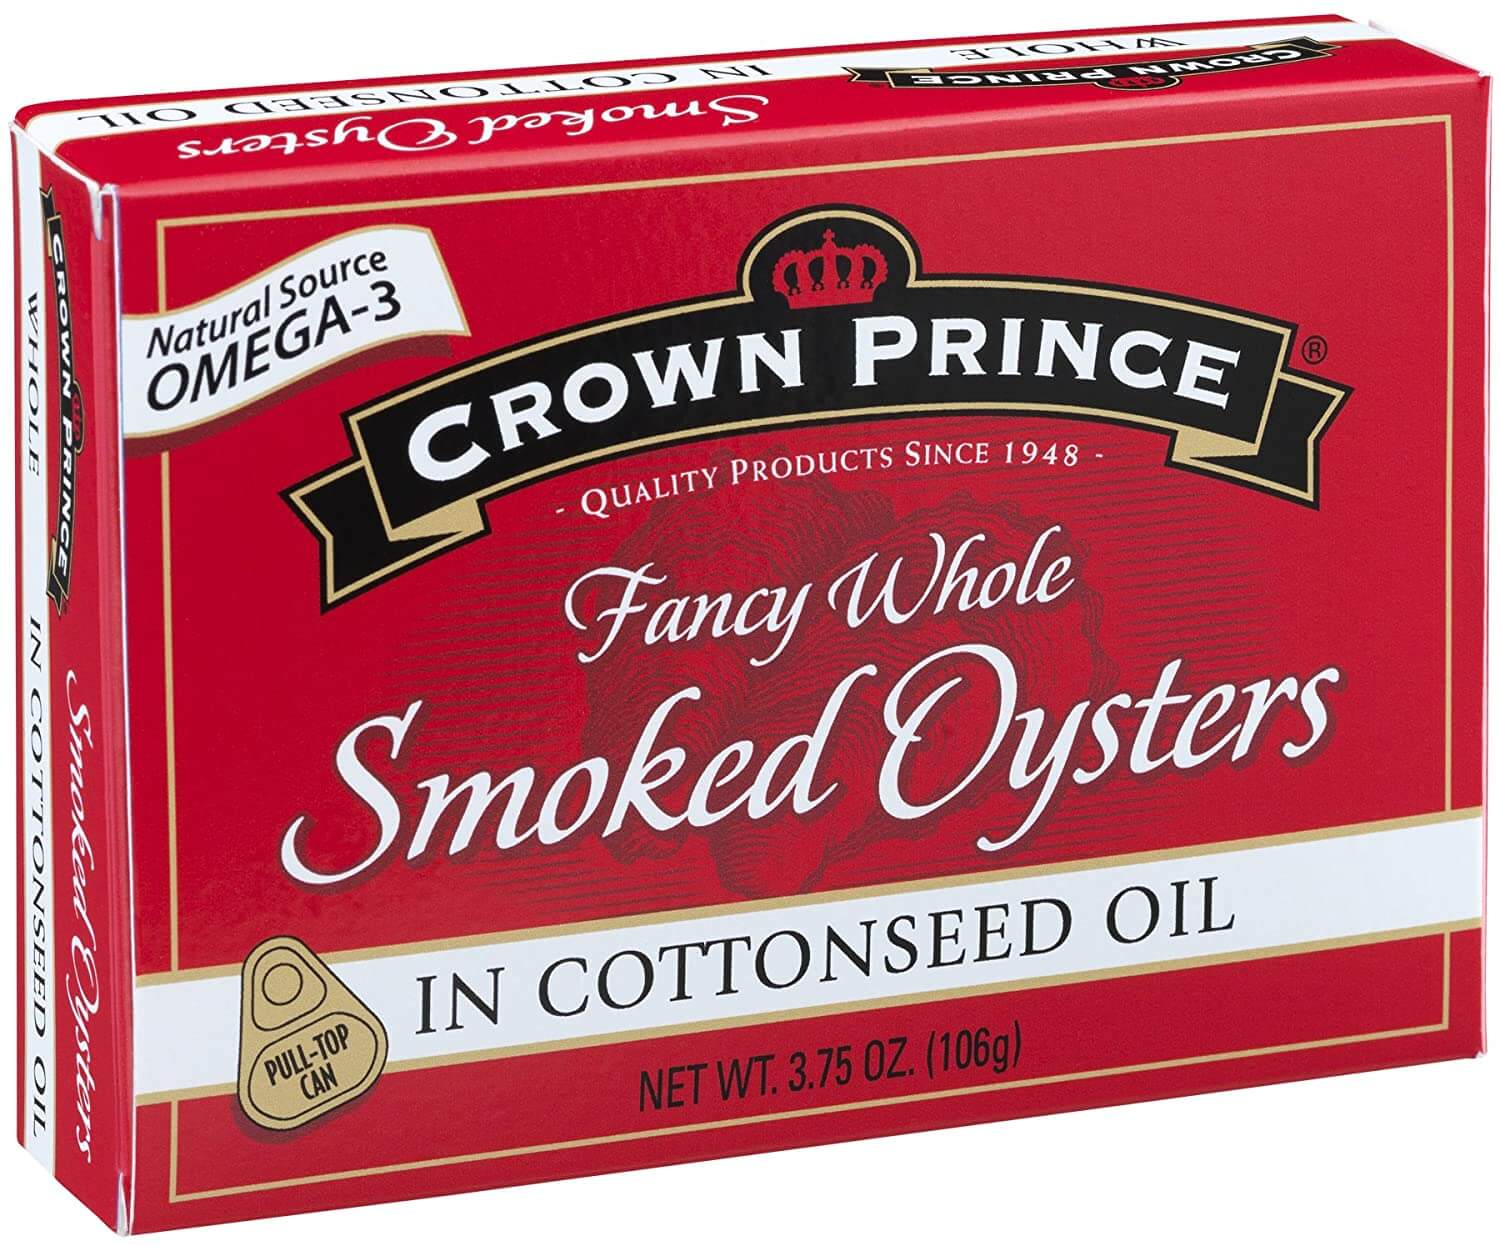 Crown Prince Smoked Oysters in Cottonseed Oil